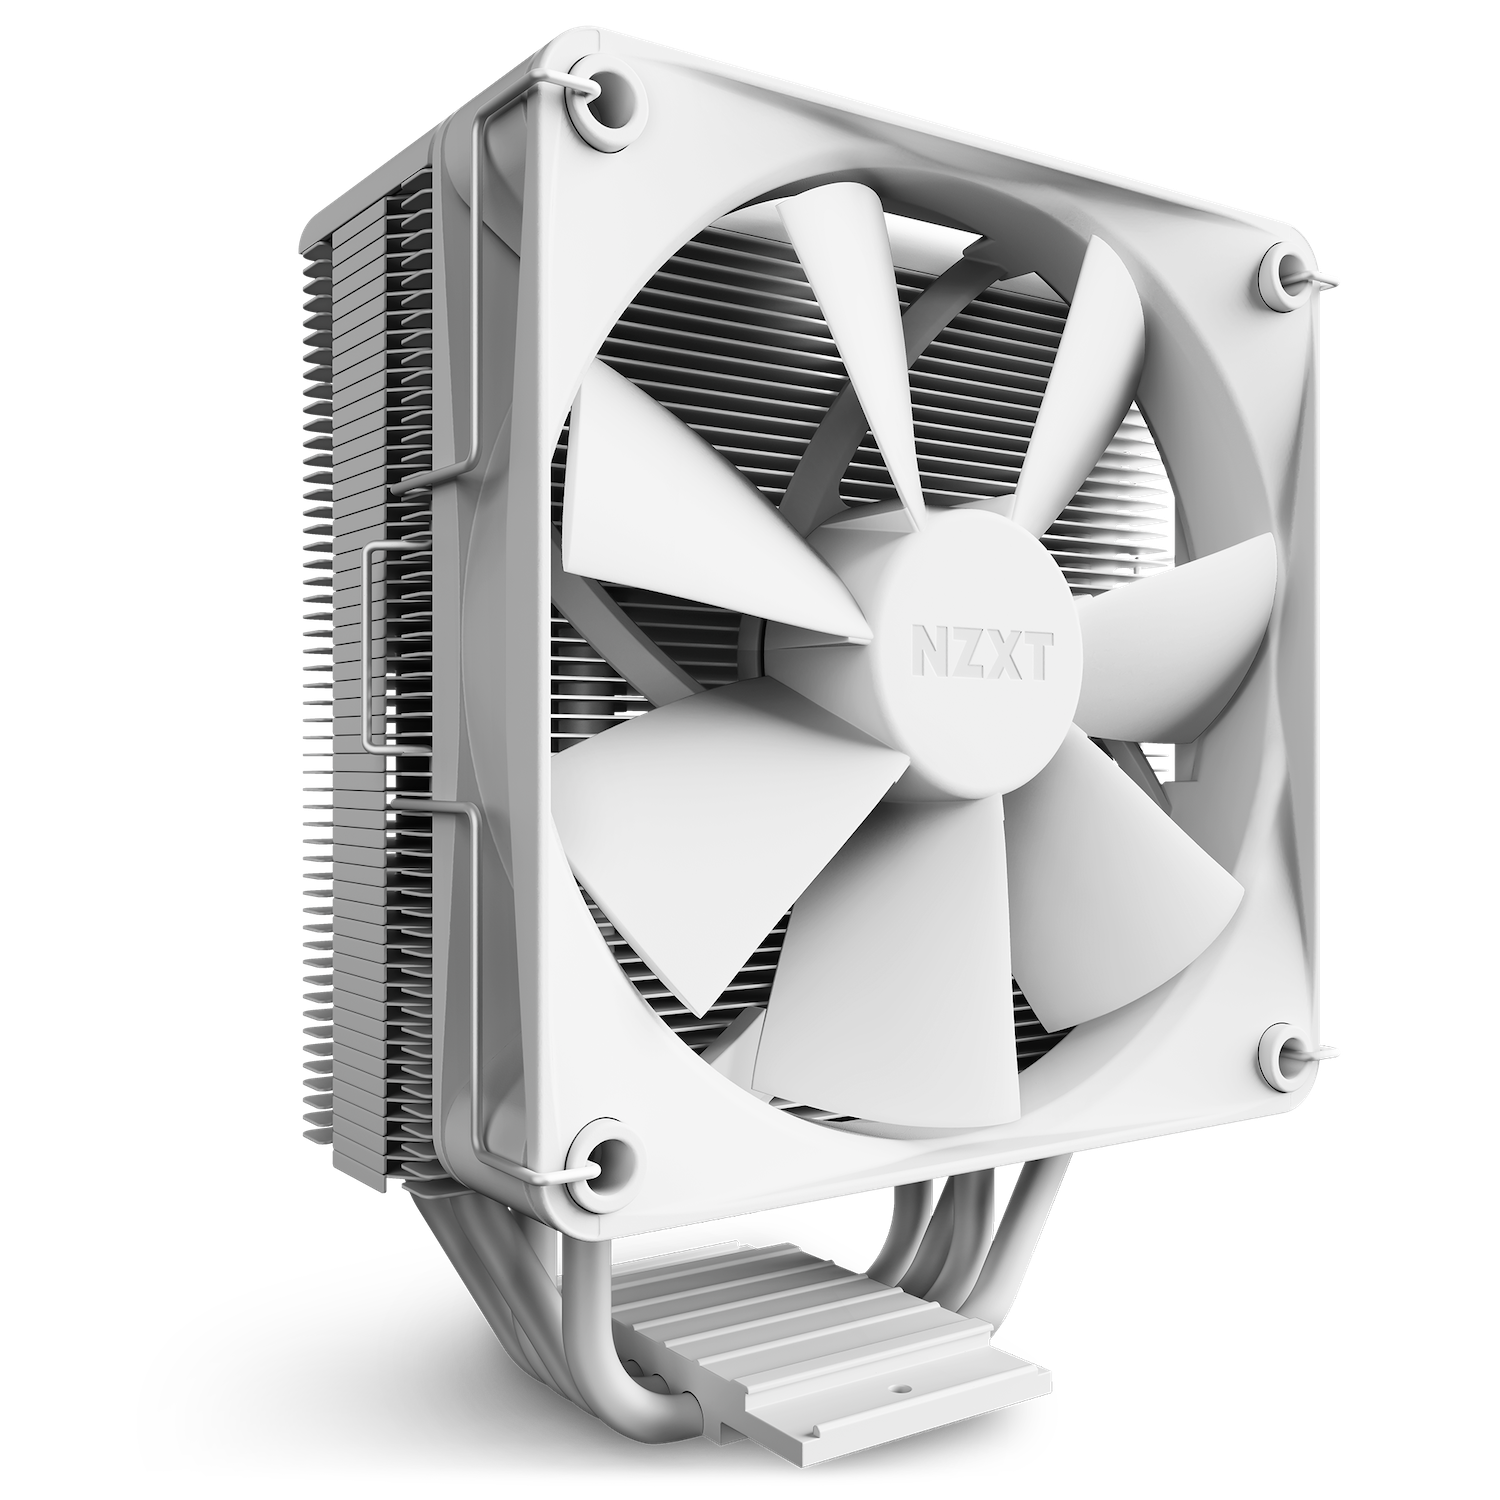 NZXT T120 | 120mm Air Cooler (White)